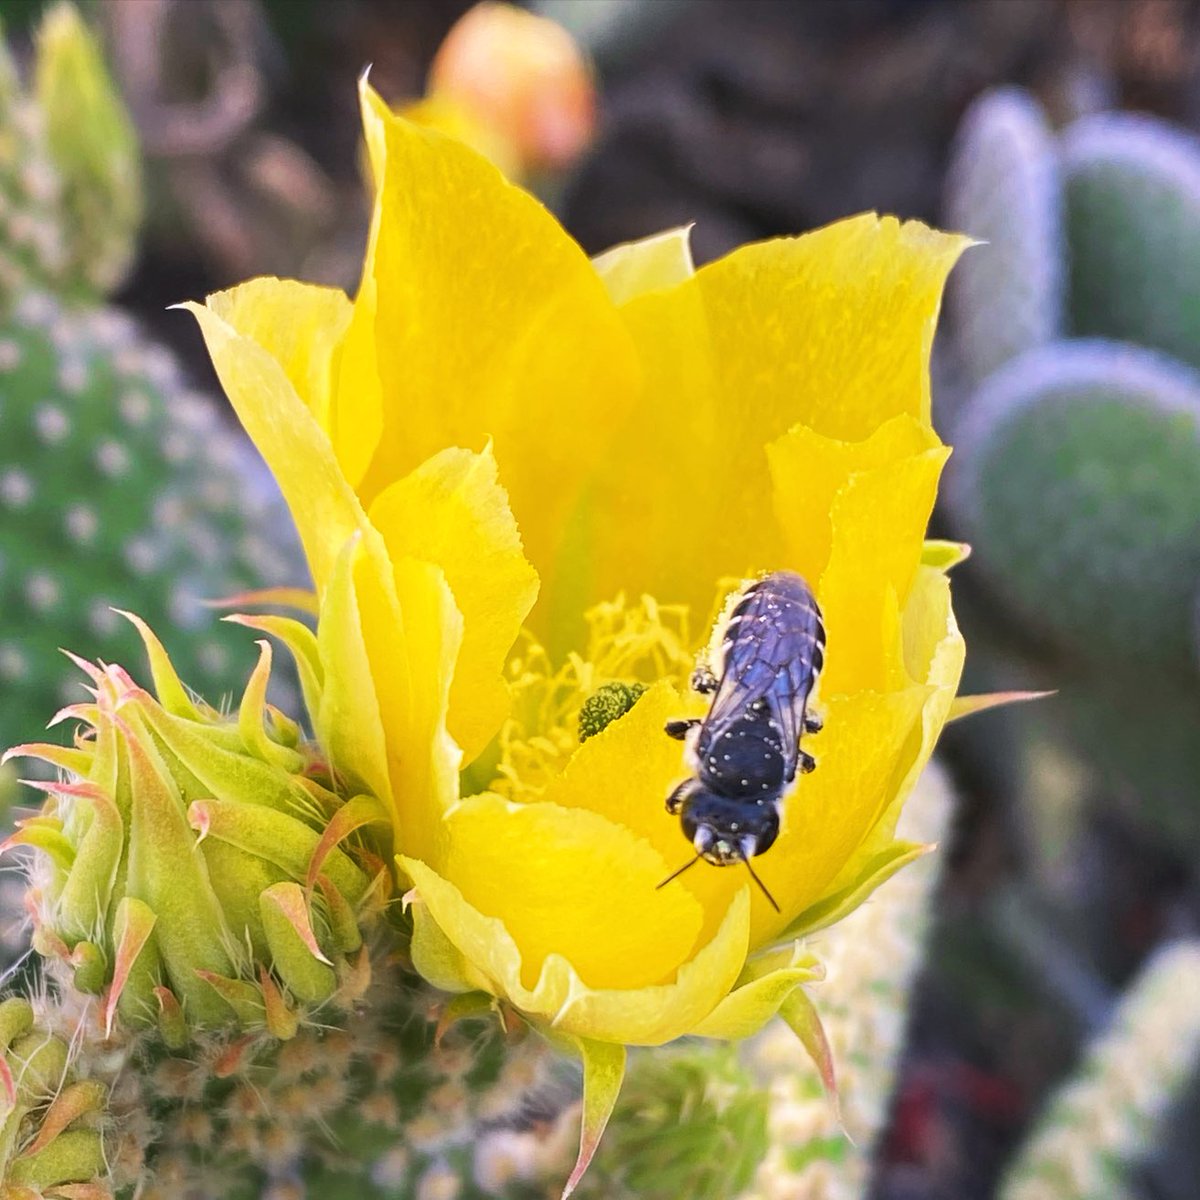 Happy #InsectThursday from a delicate cactus flower and friend. #flowers #bees 🐝